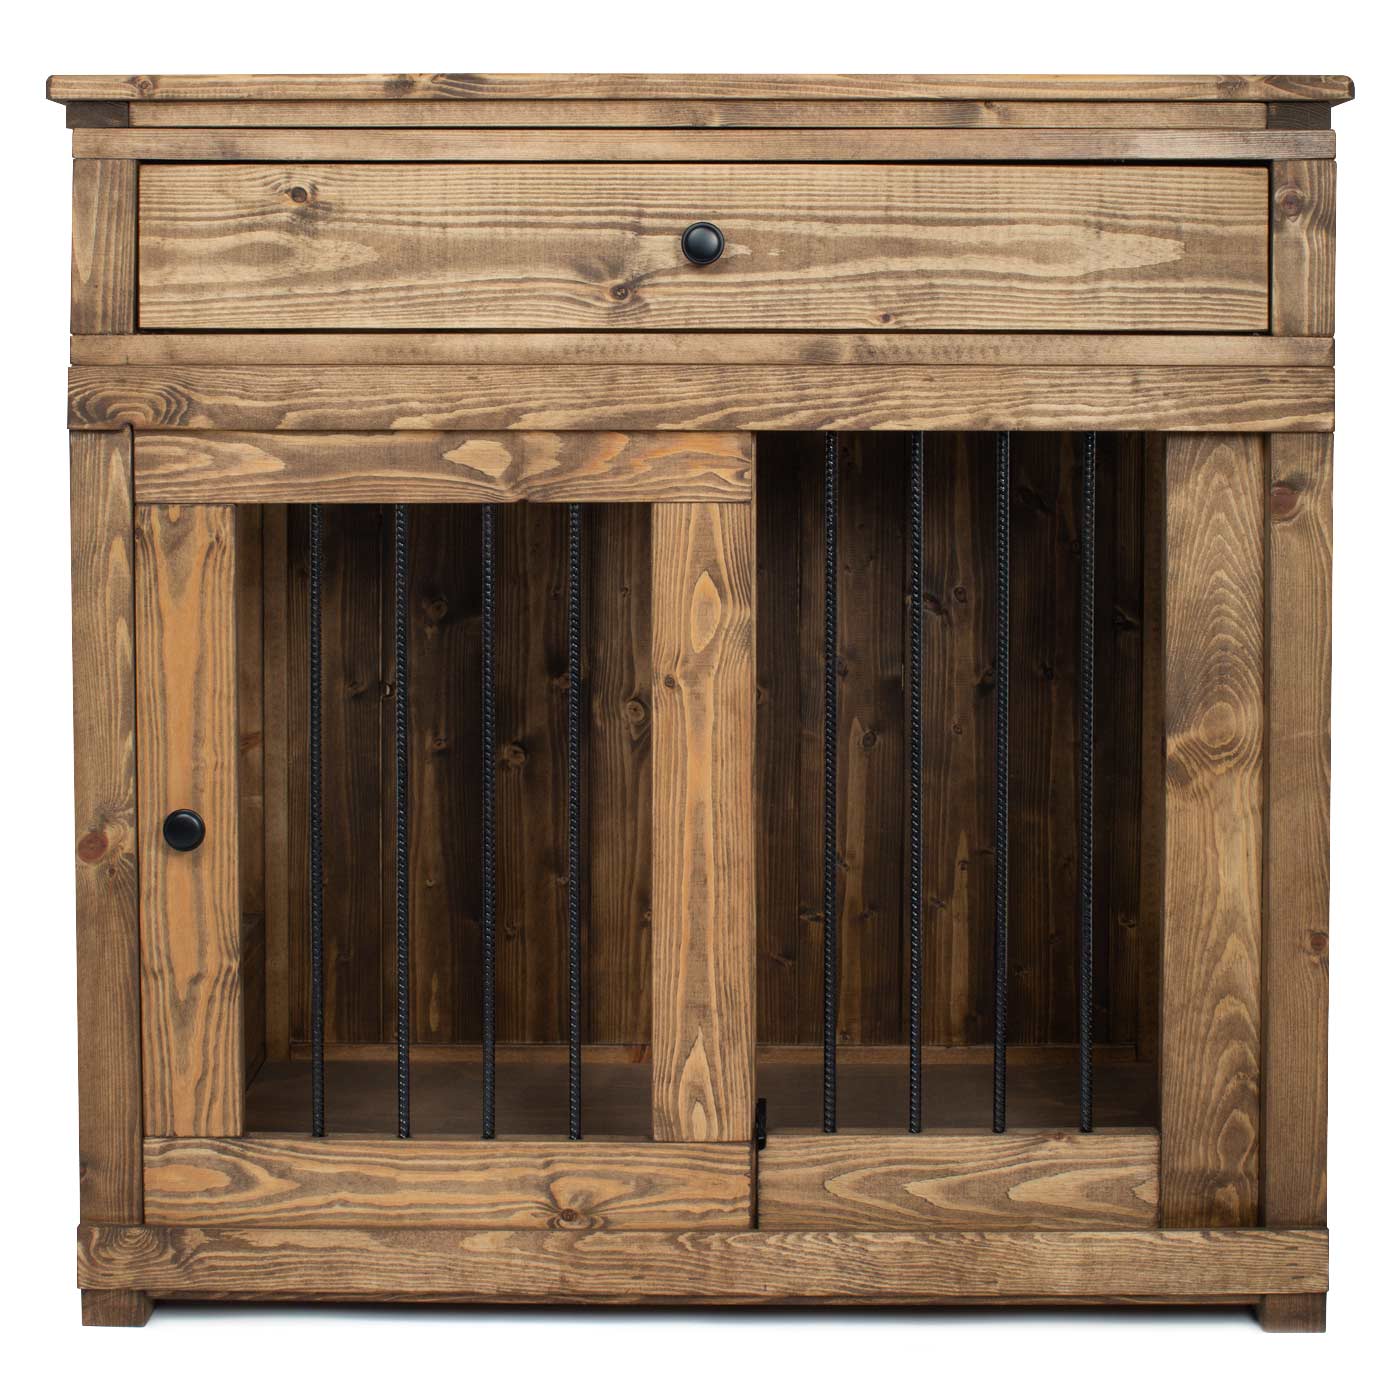 Wooden Sliding Door Broadsand Dog Crate with Drawer by Lords & Labradors